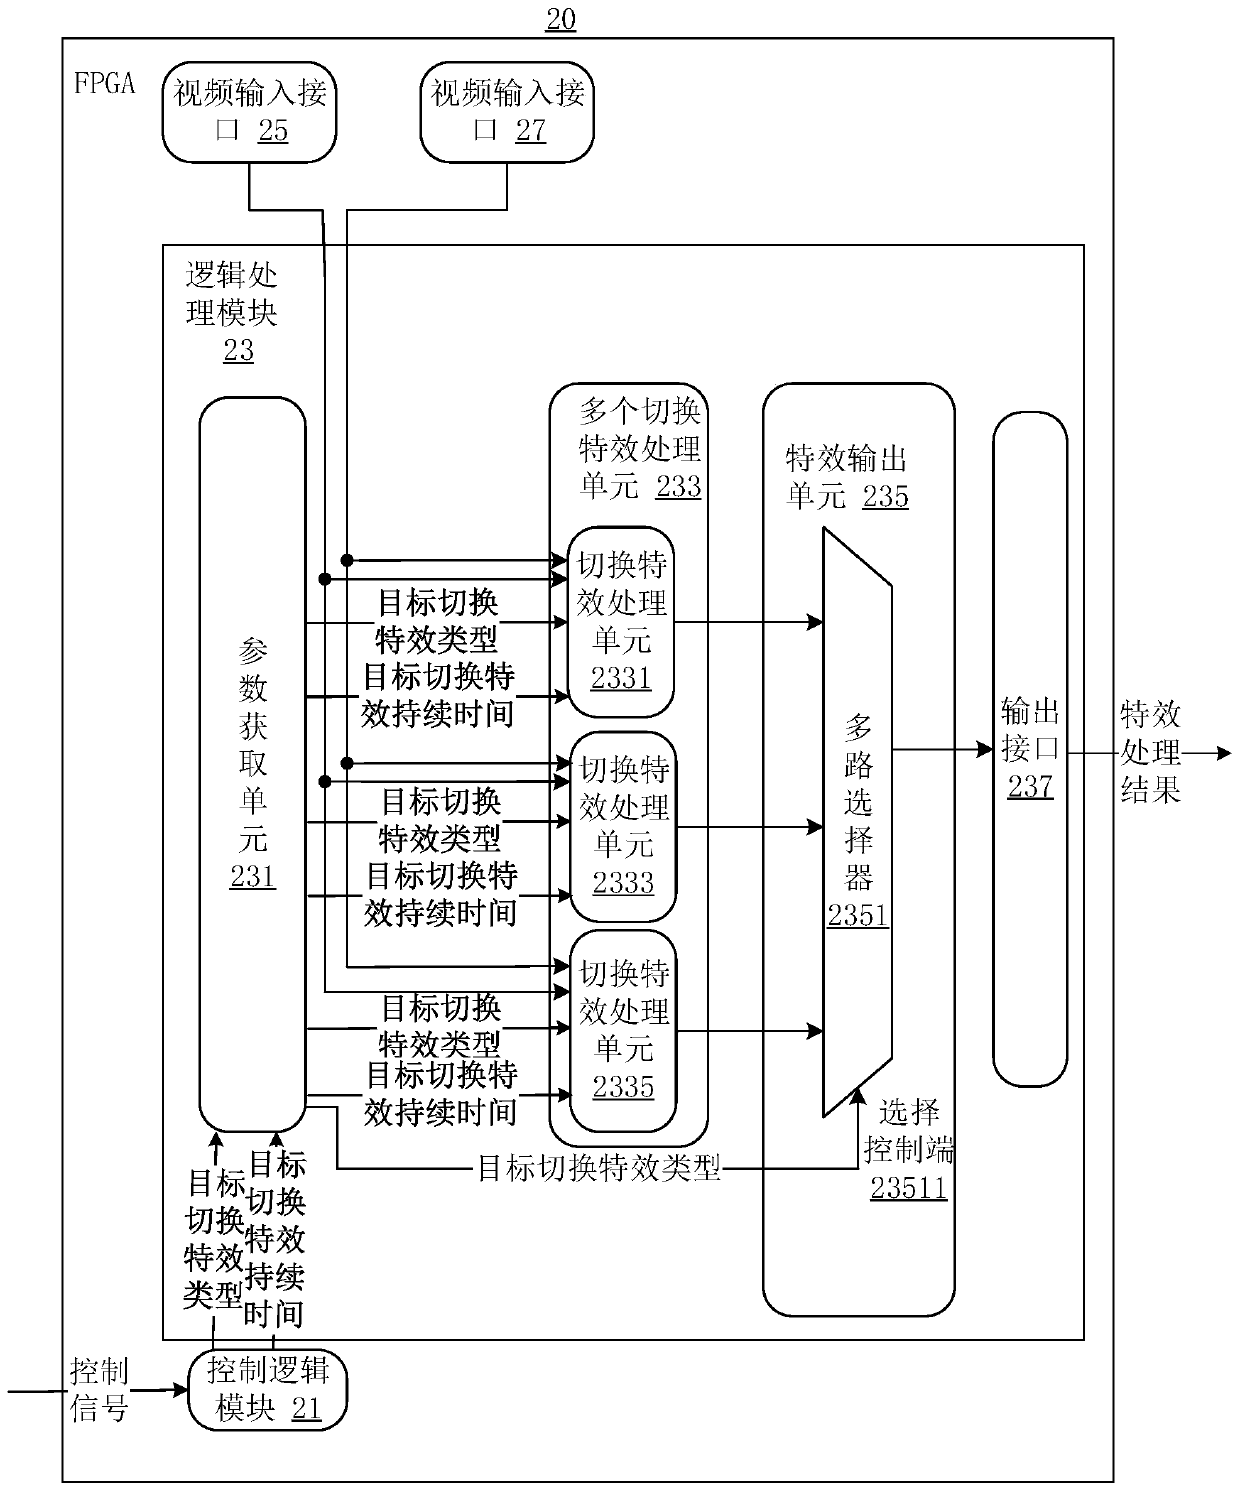 Video source switching special effect realization device and video source switching special effect realization method